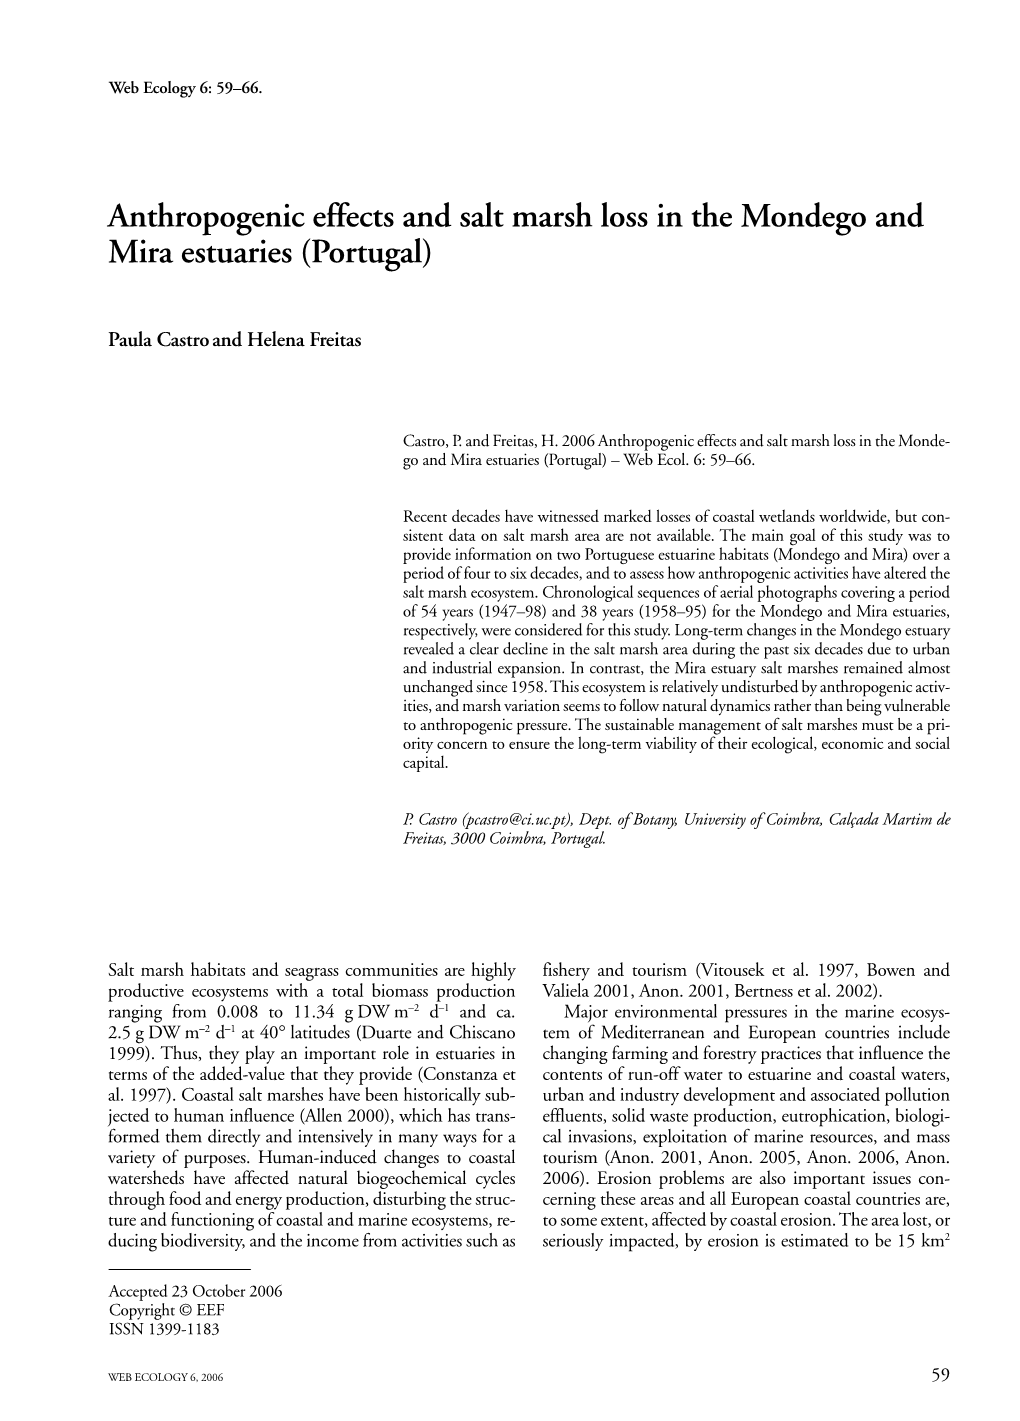 Anthropogenic Effects and Salt Marsh Loss in the Mondego and Mira Estuaries (Portugal)